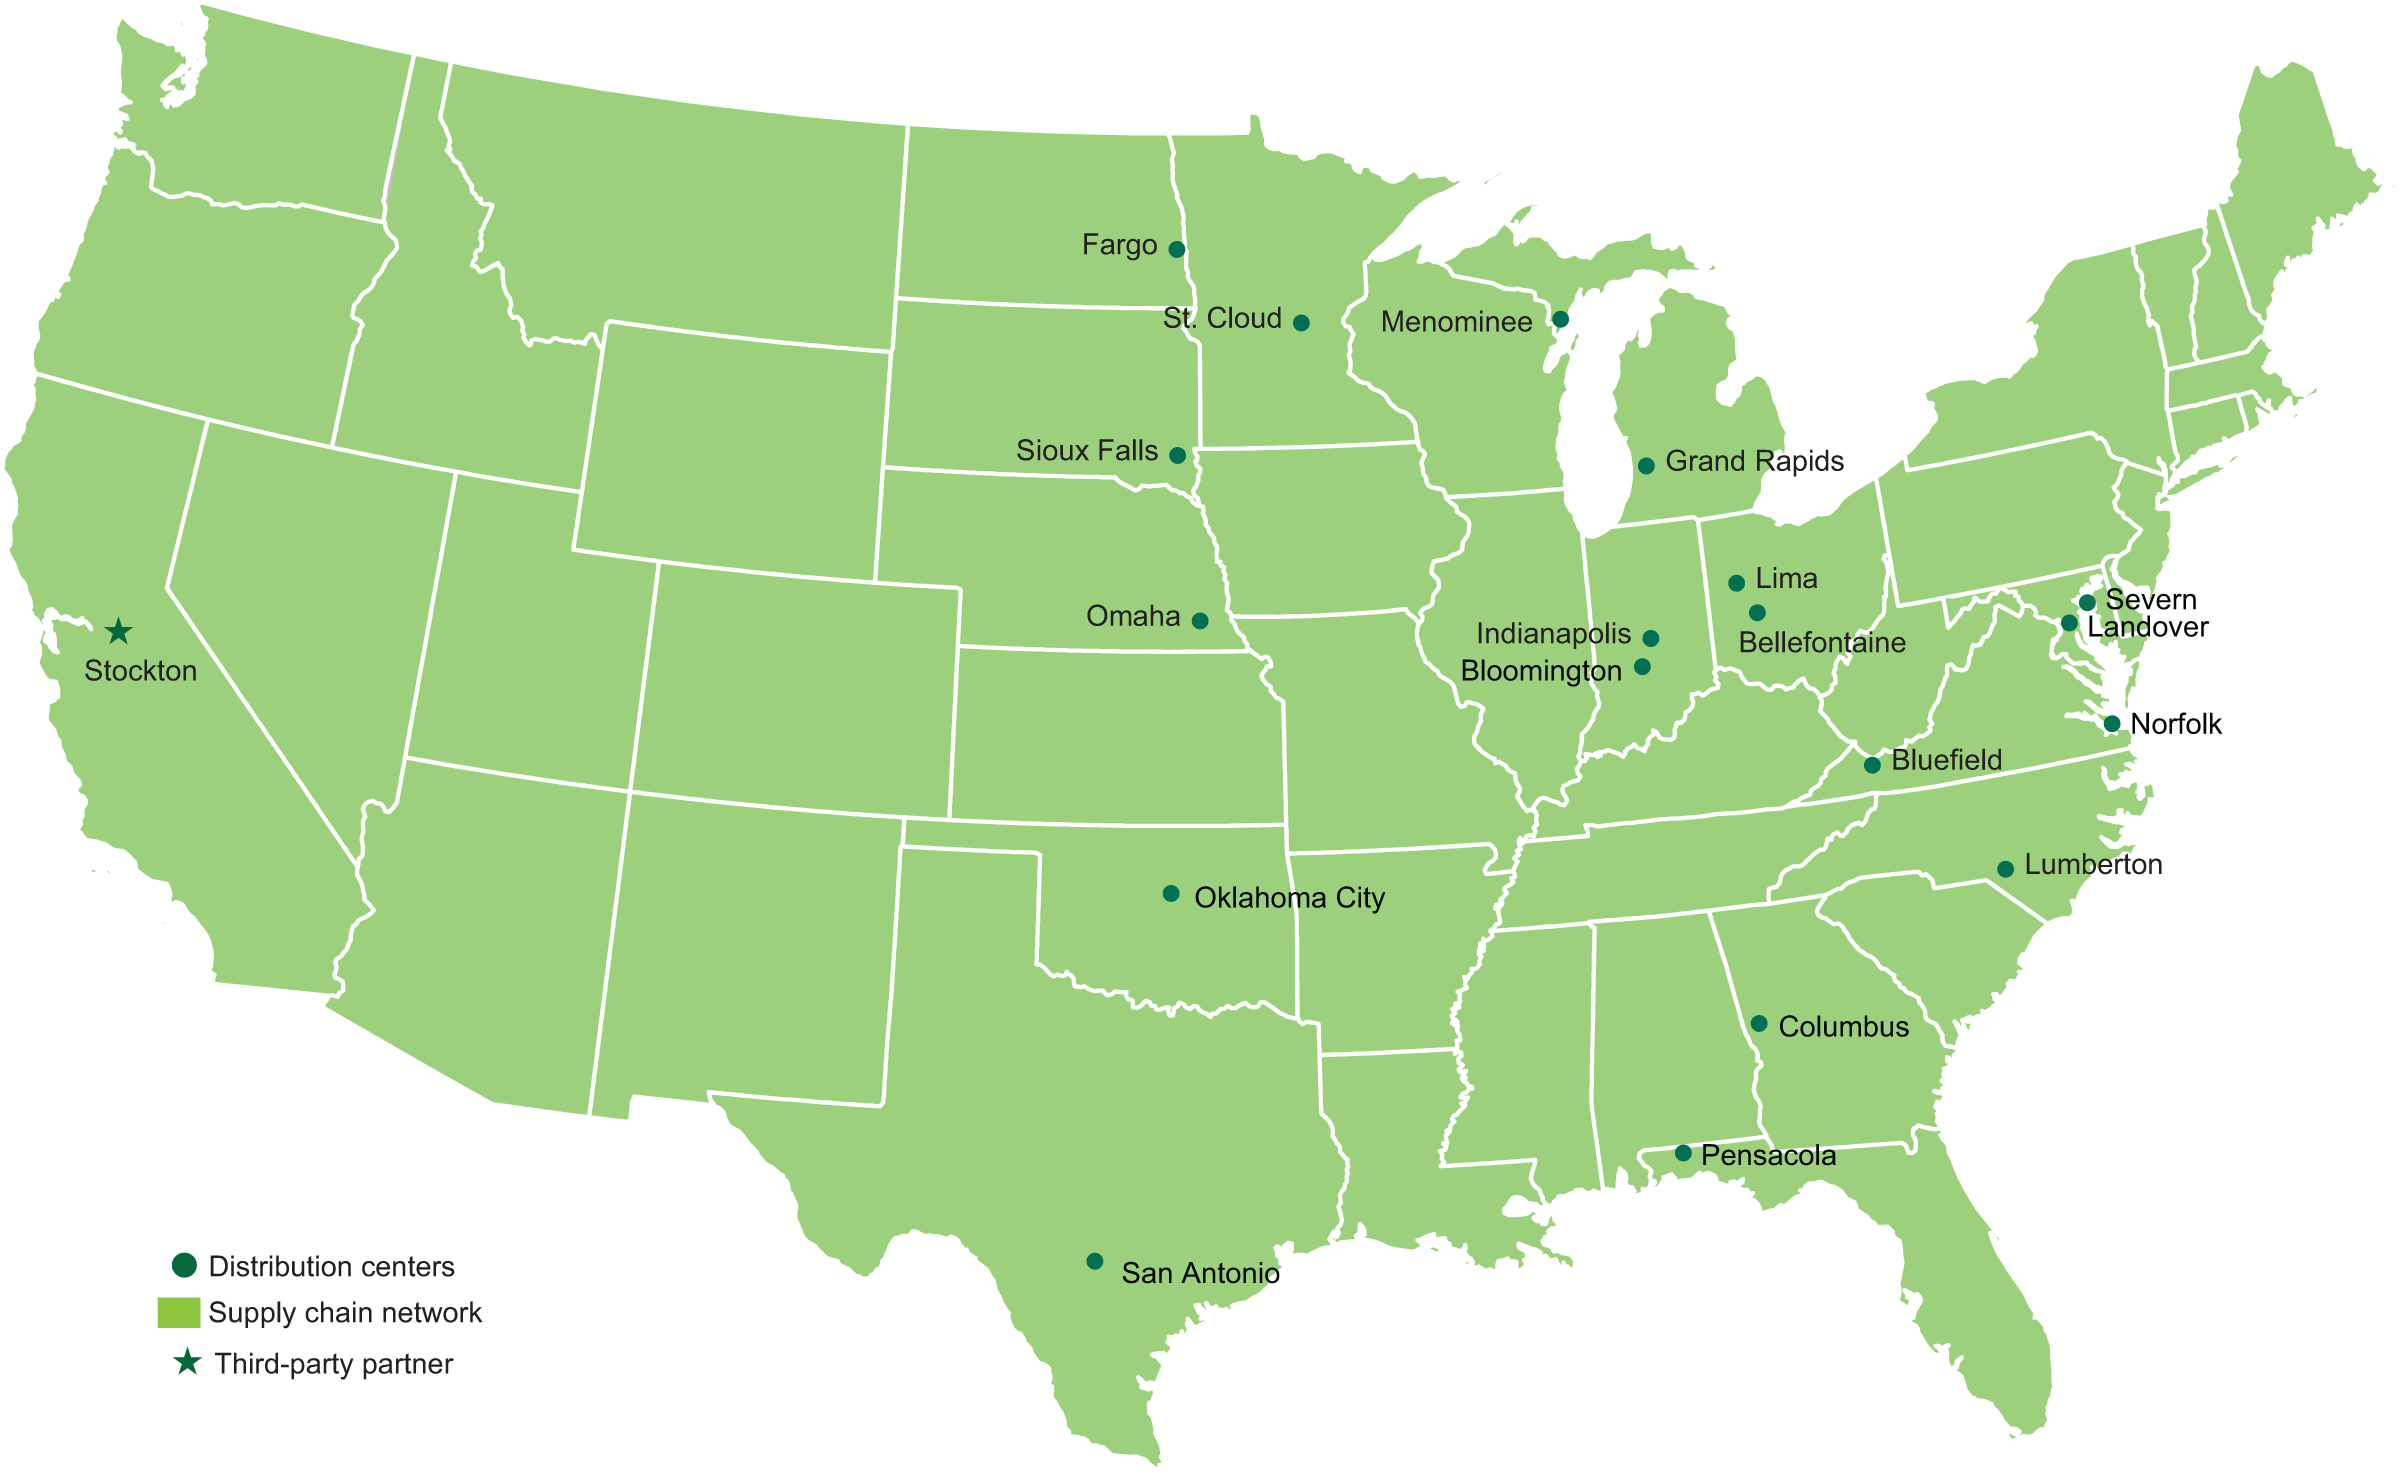 Map of SpartanNash distribution centers across the United States